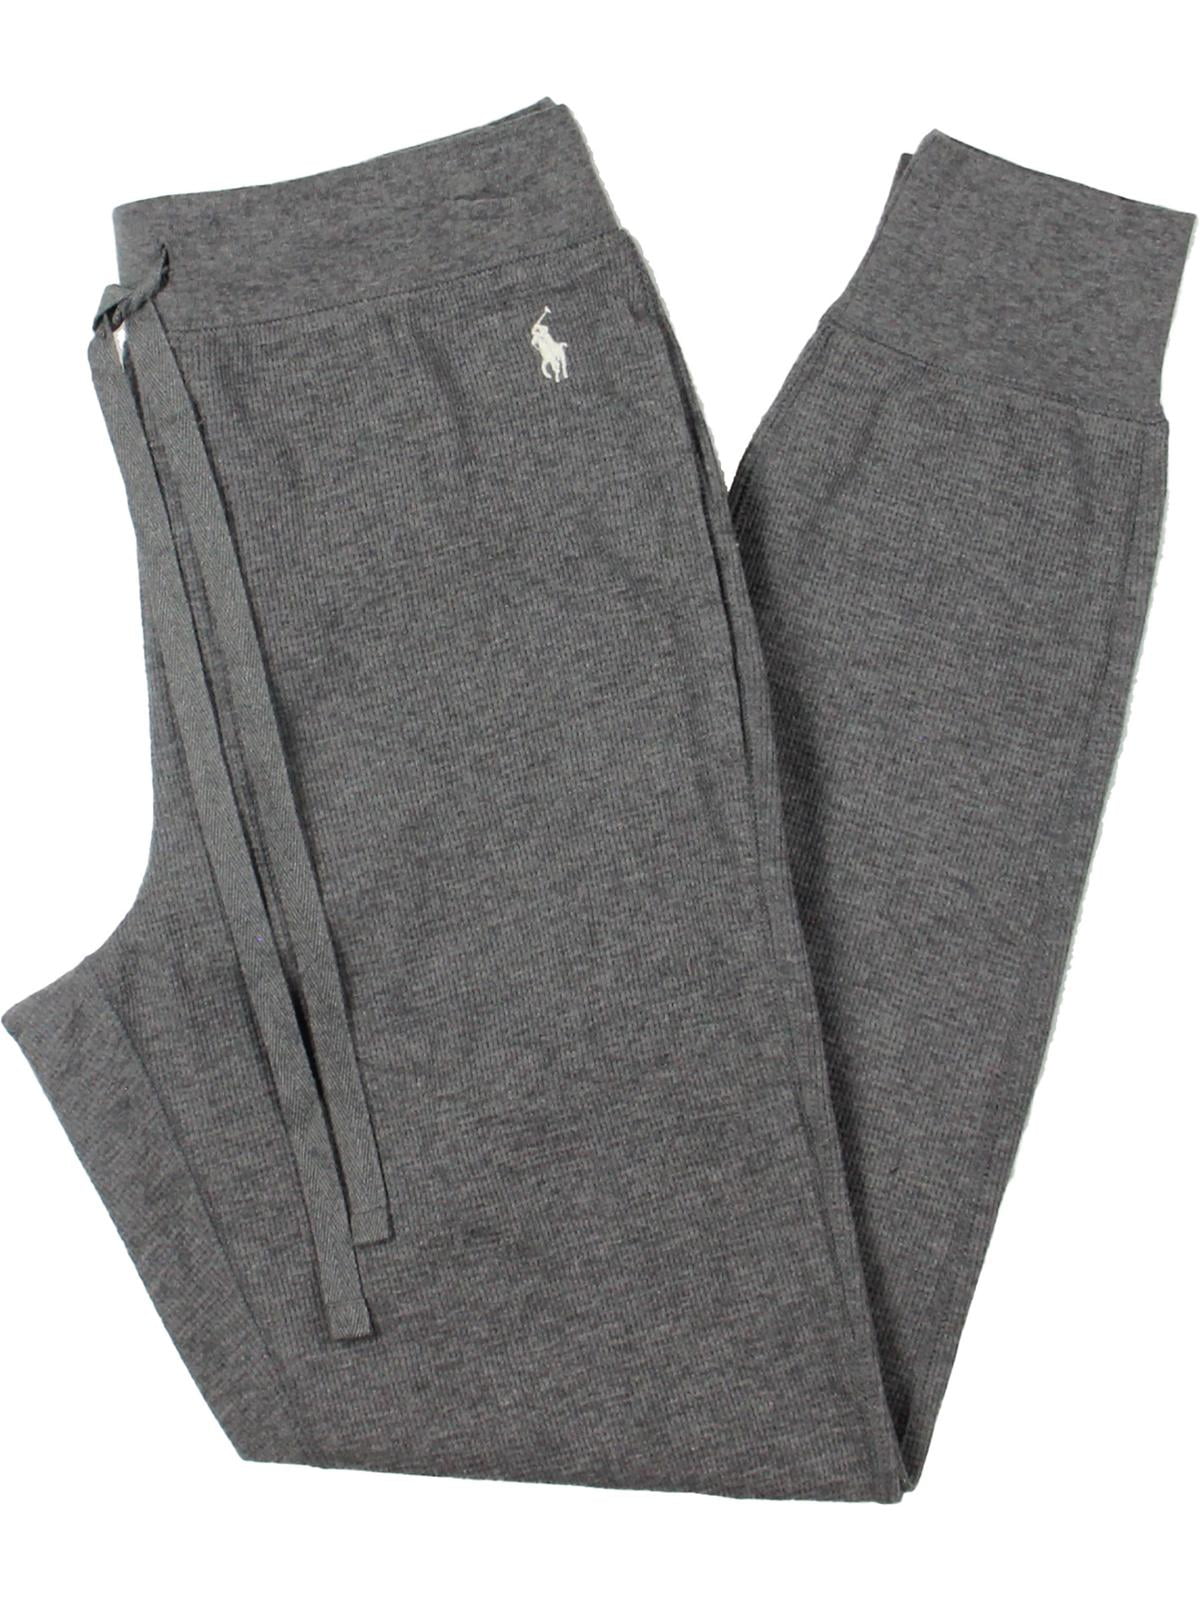 Polo Ralph Lauren Midweight Waffle Solid Jogger Pants